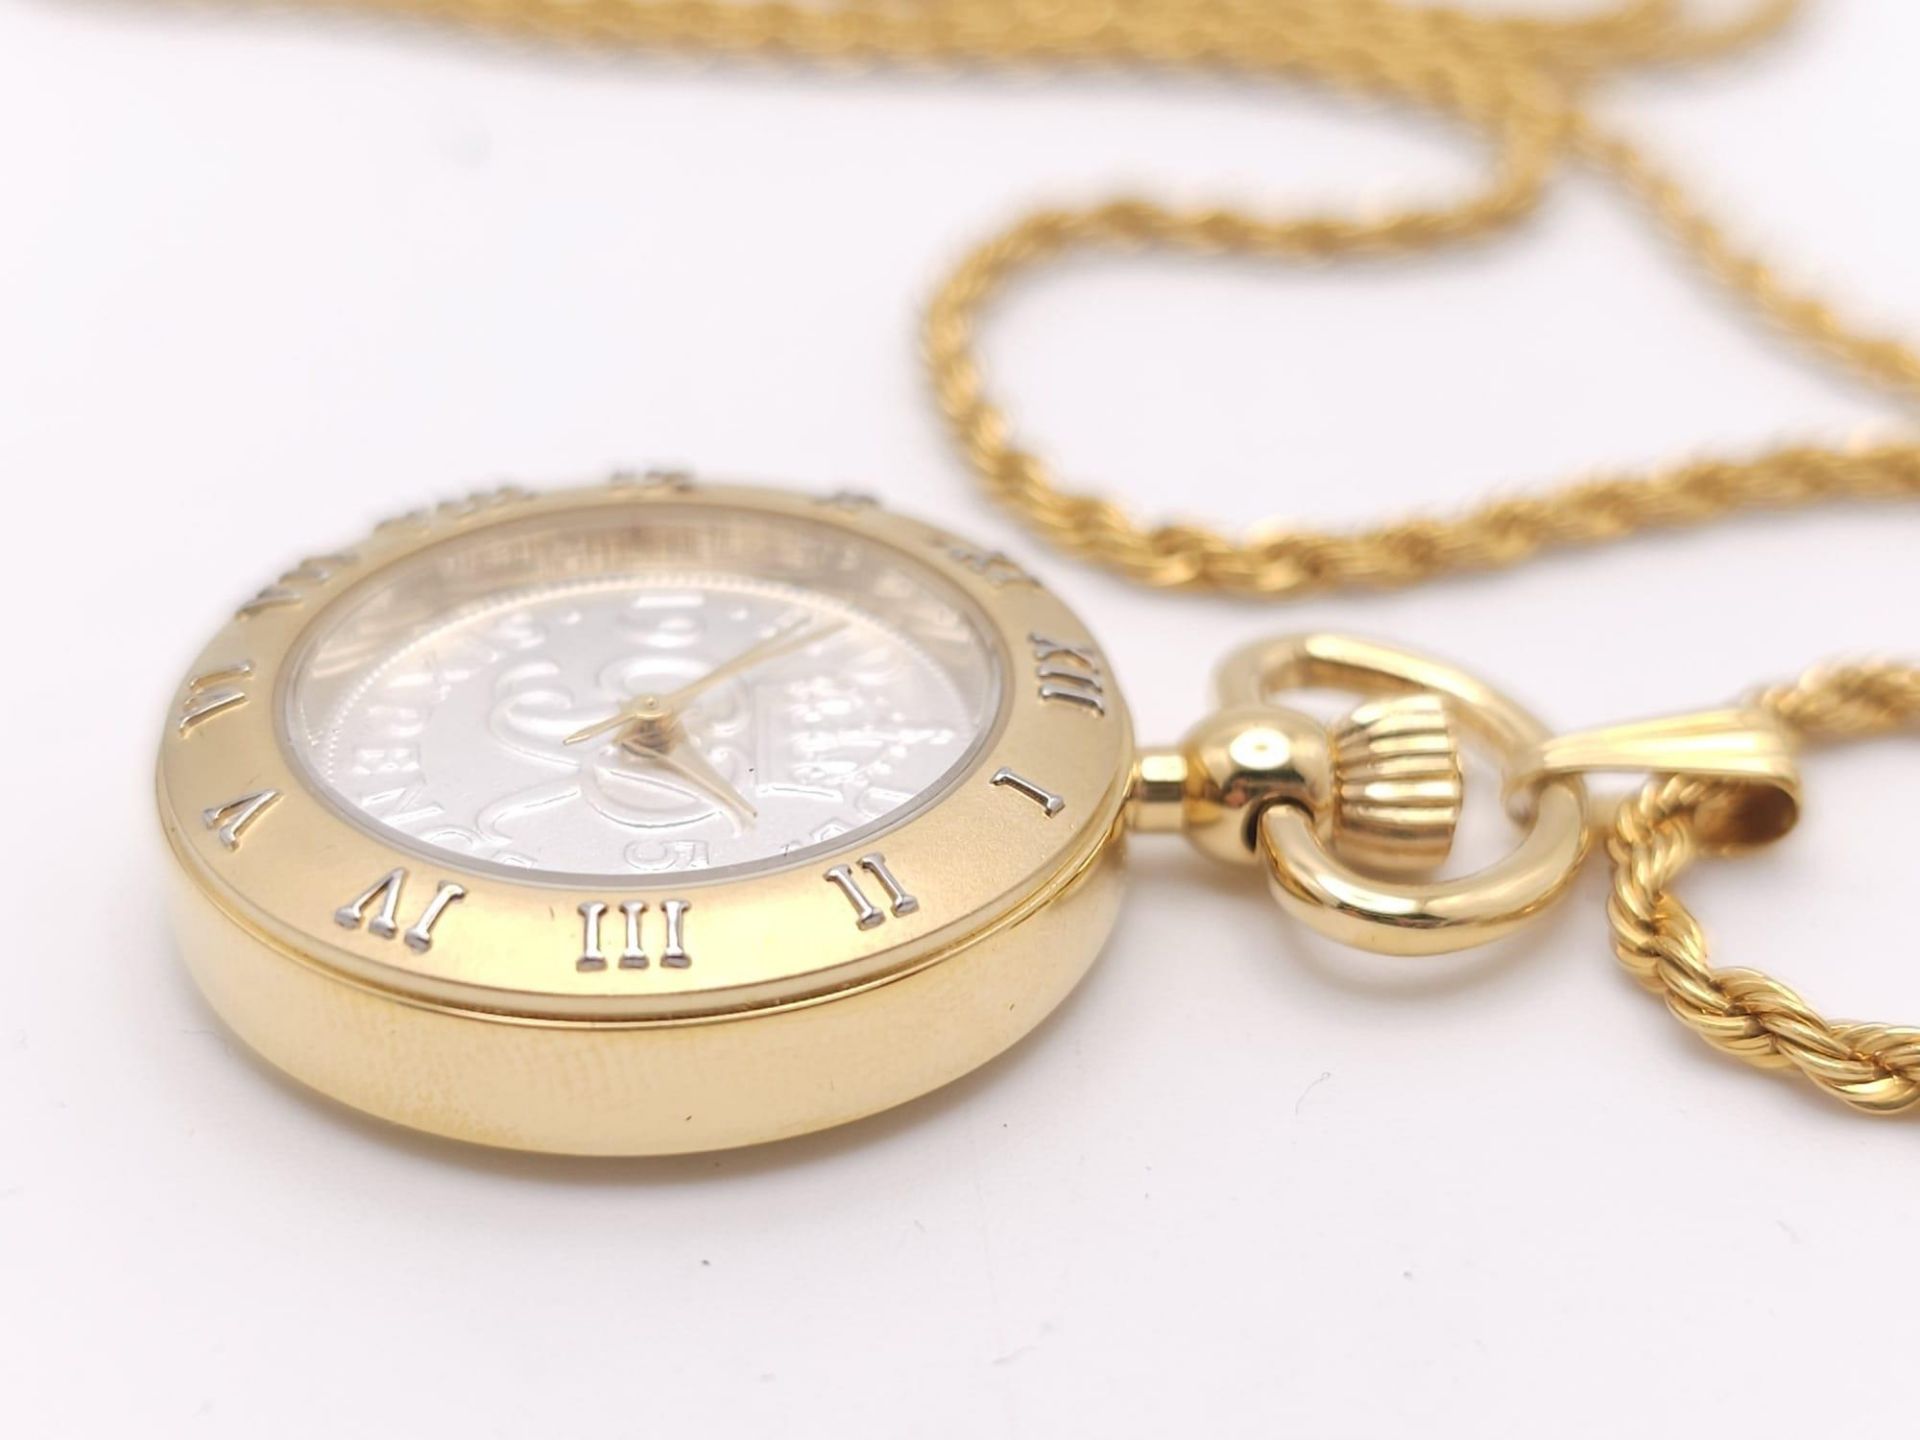 A BRAND NEW "COINWATCH" WITH 2 YEAR GUARANTEE . A PENDANT WATCH WITH A GENUINE COIN AS THE DIAL , - Bild 6 aus 18